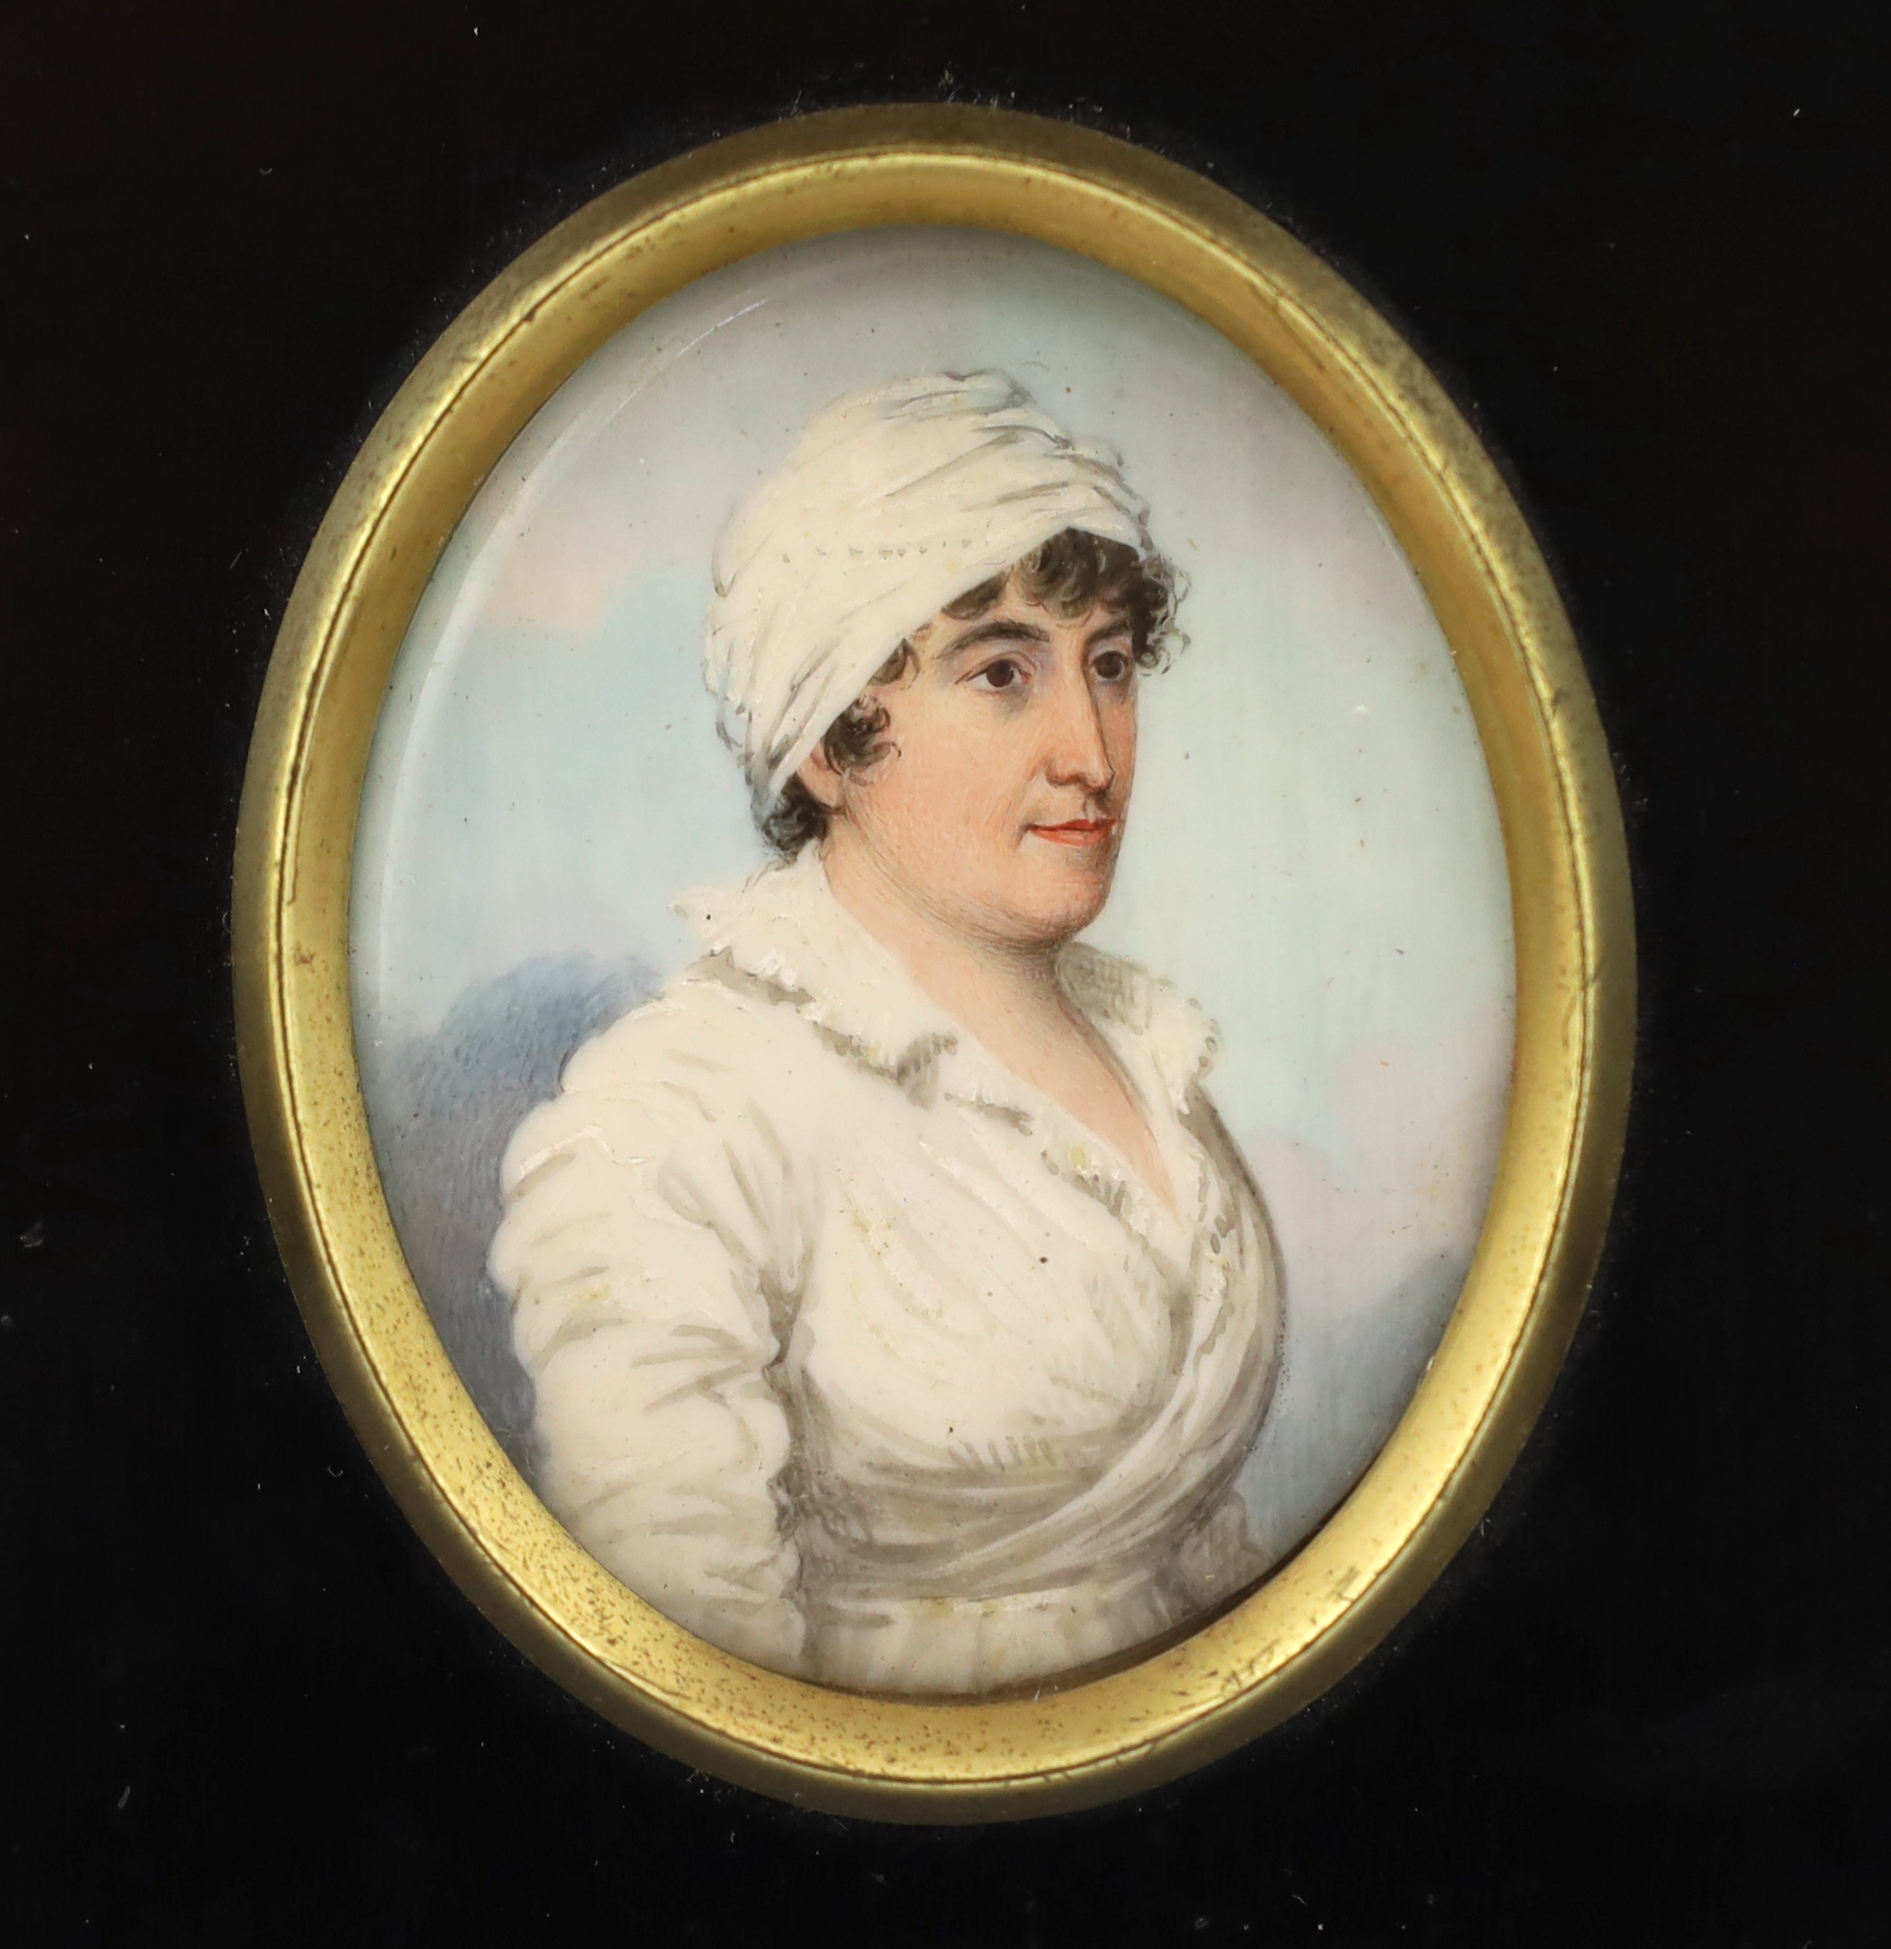 Frederick Buck (Irish, 1771-1840), Portrait miniature of a lady, watercolour on ivory, 6 x 4.6cm. CITES Submission reference 7Z7M9H2P